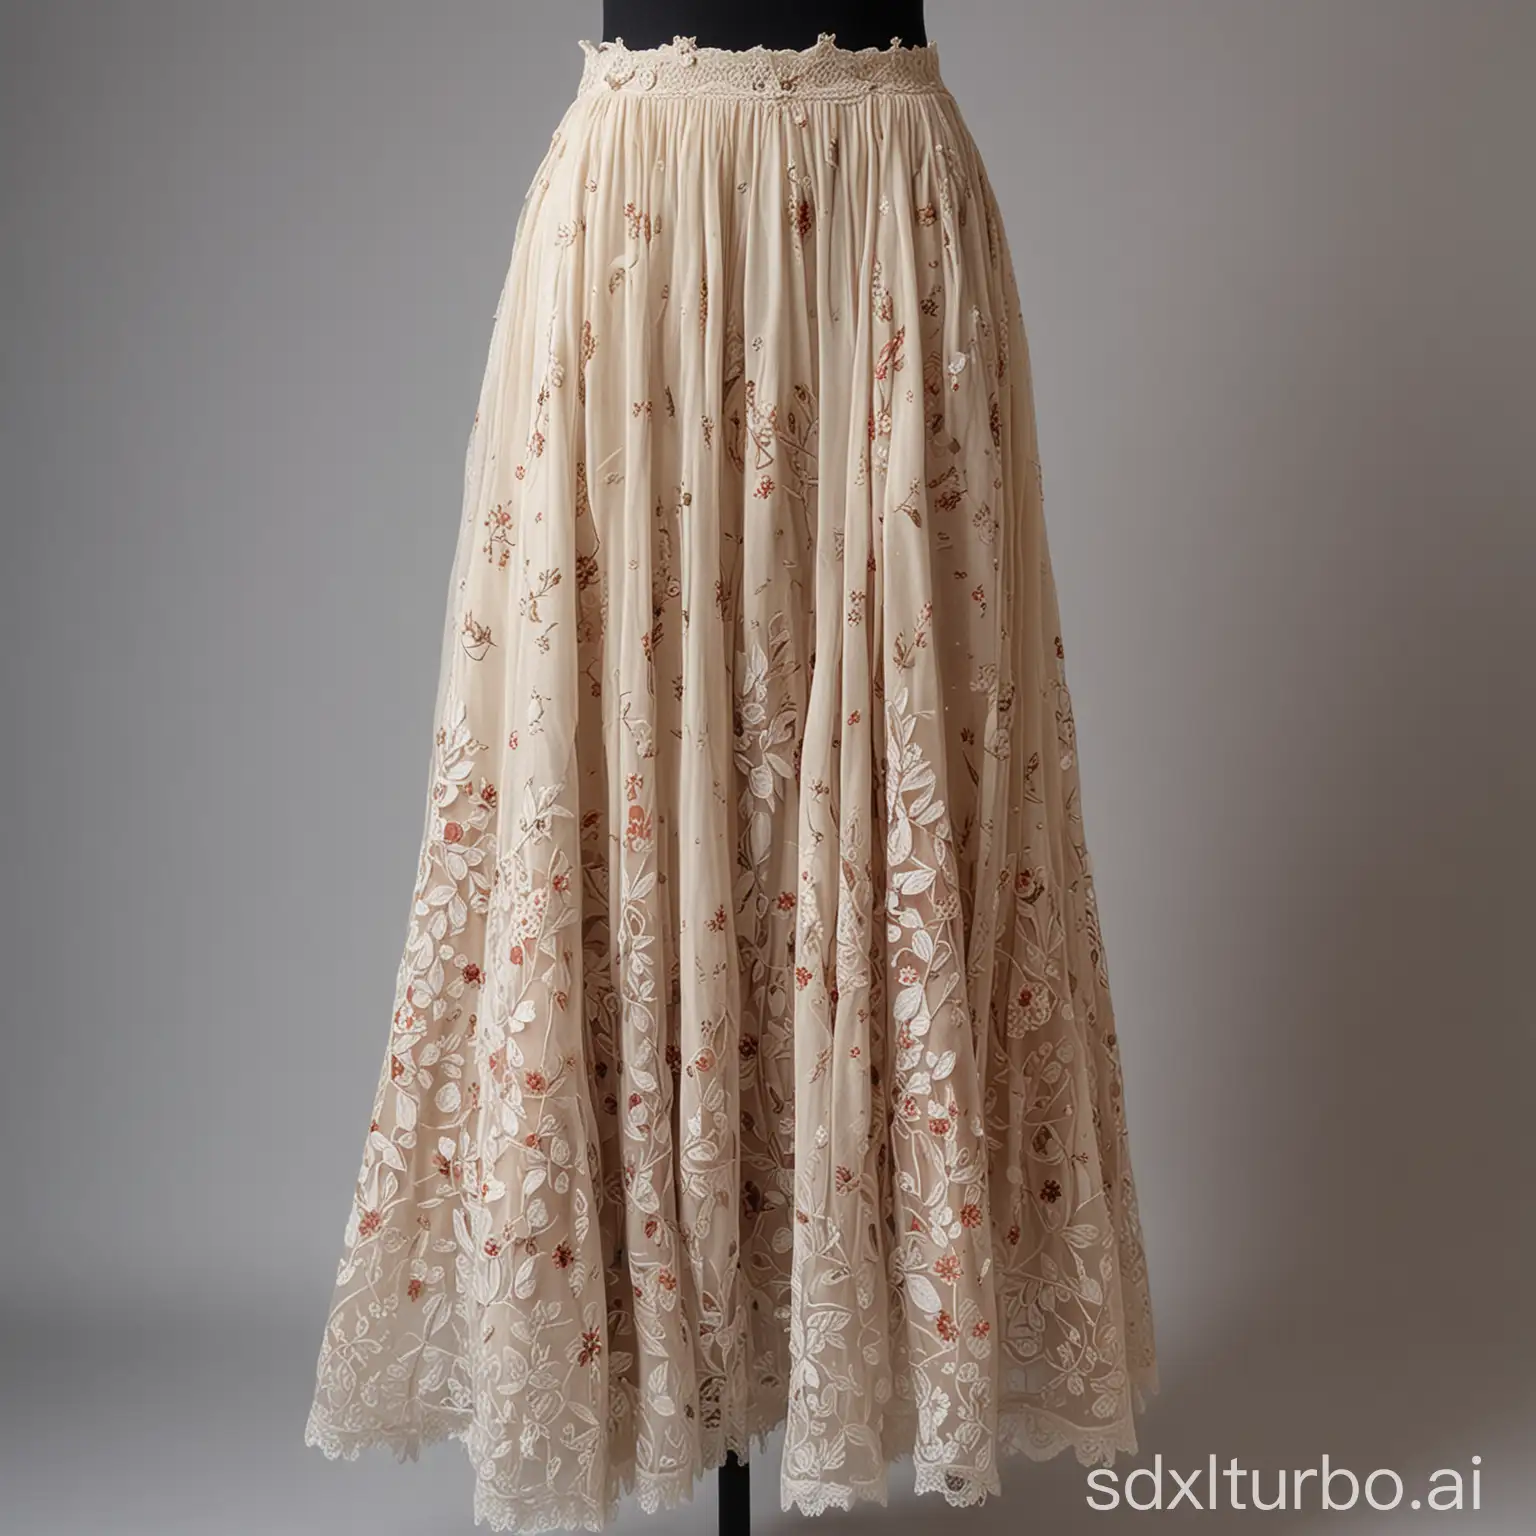 A long, flowing skirt made of a soft, lightweight fabric is draped over a mannequin. The skirt has a beautiful pattern and is embellished with delicate lace.